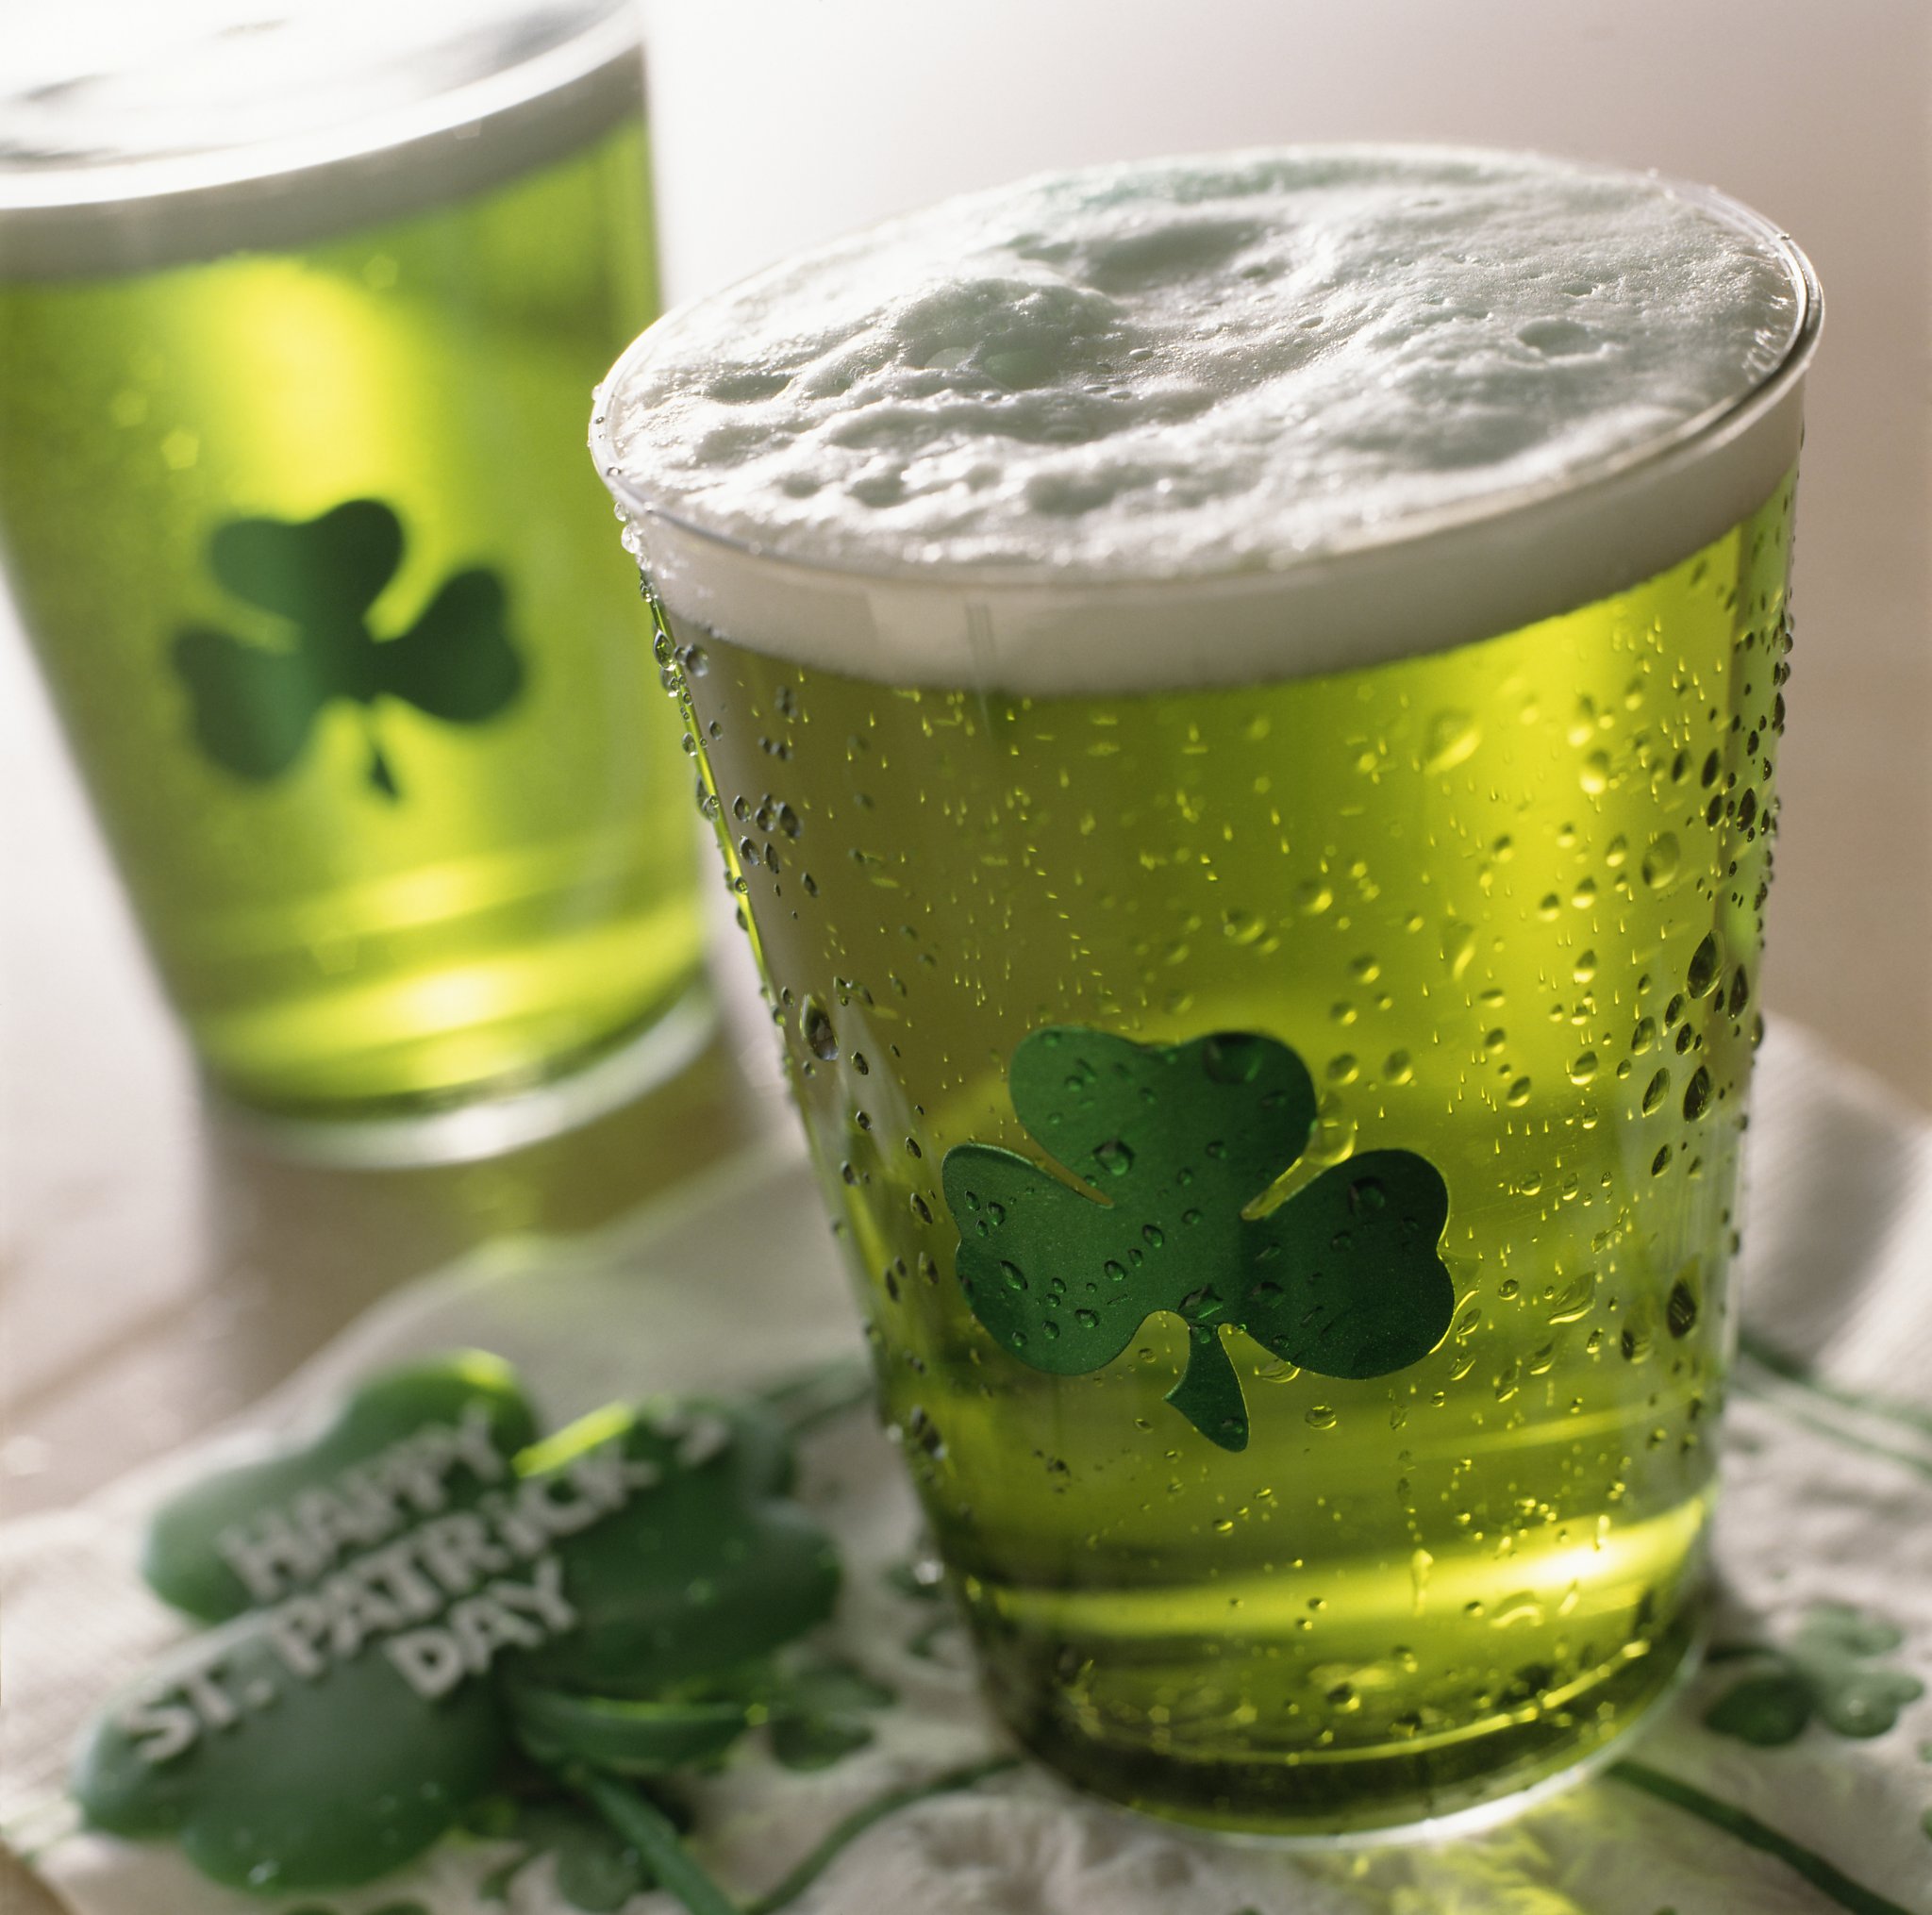 why-do-we-celebrate-st-patrick-s-day-in-such-a-specifically-tacky-way